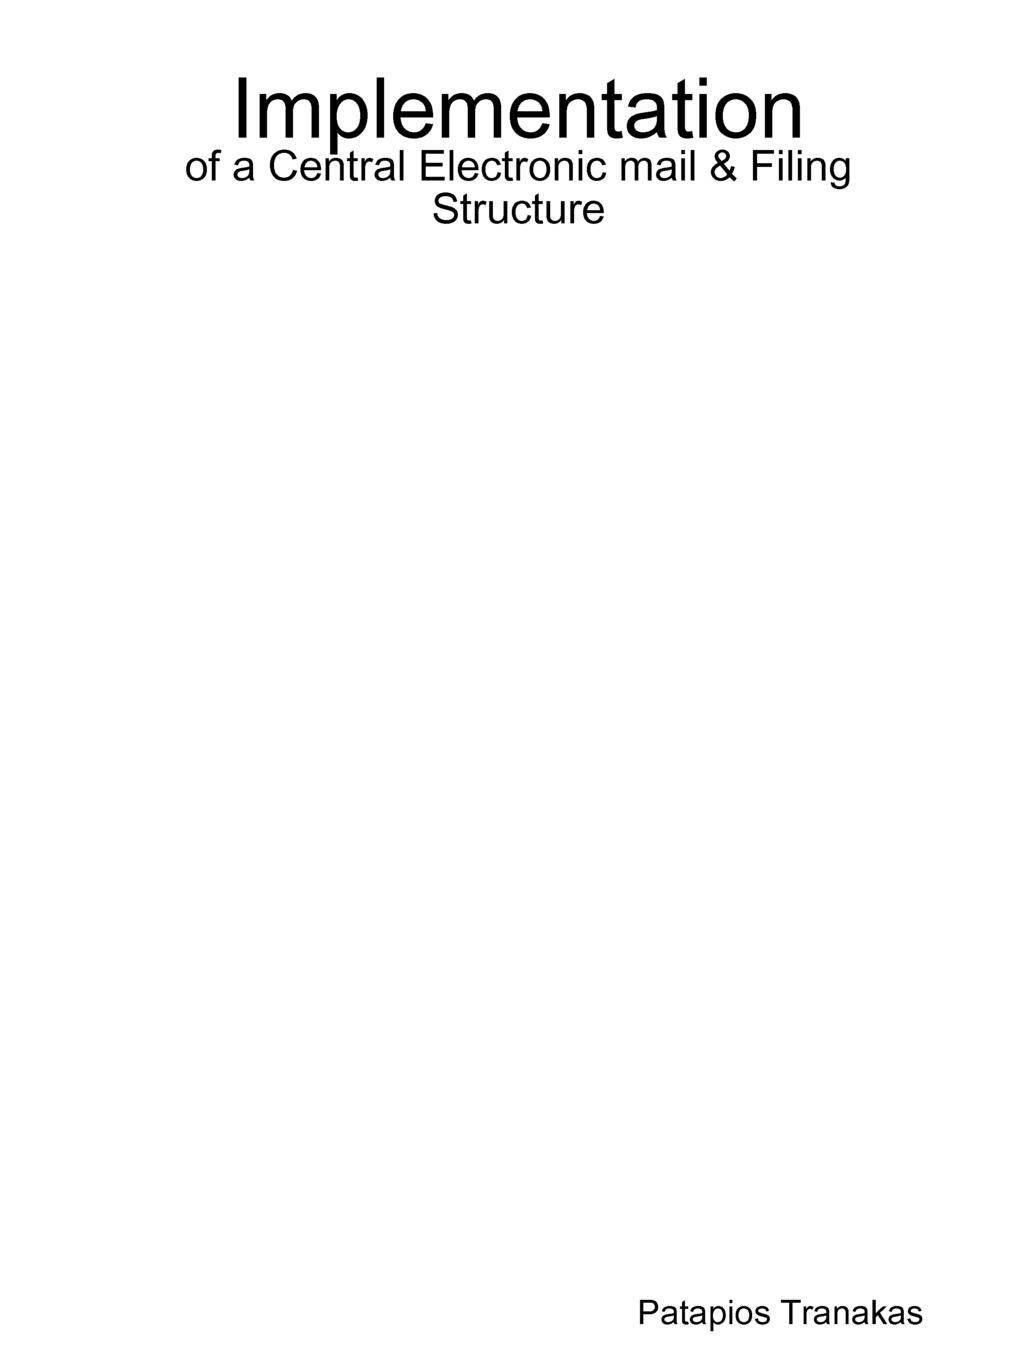 Implementation of a Central Electronic mail . Filing Structure